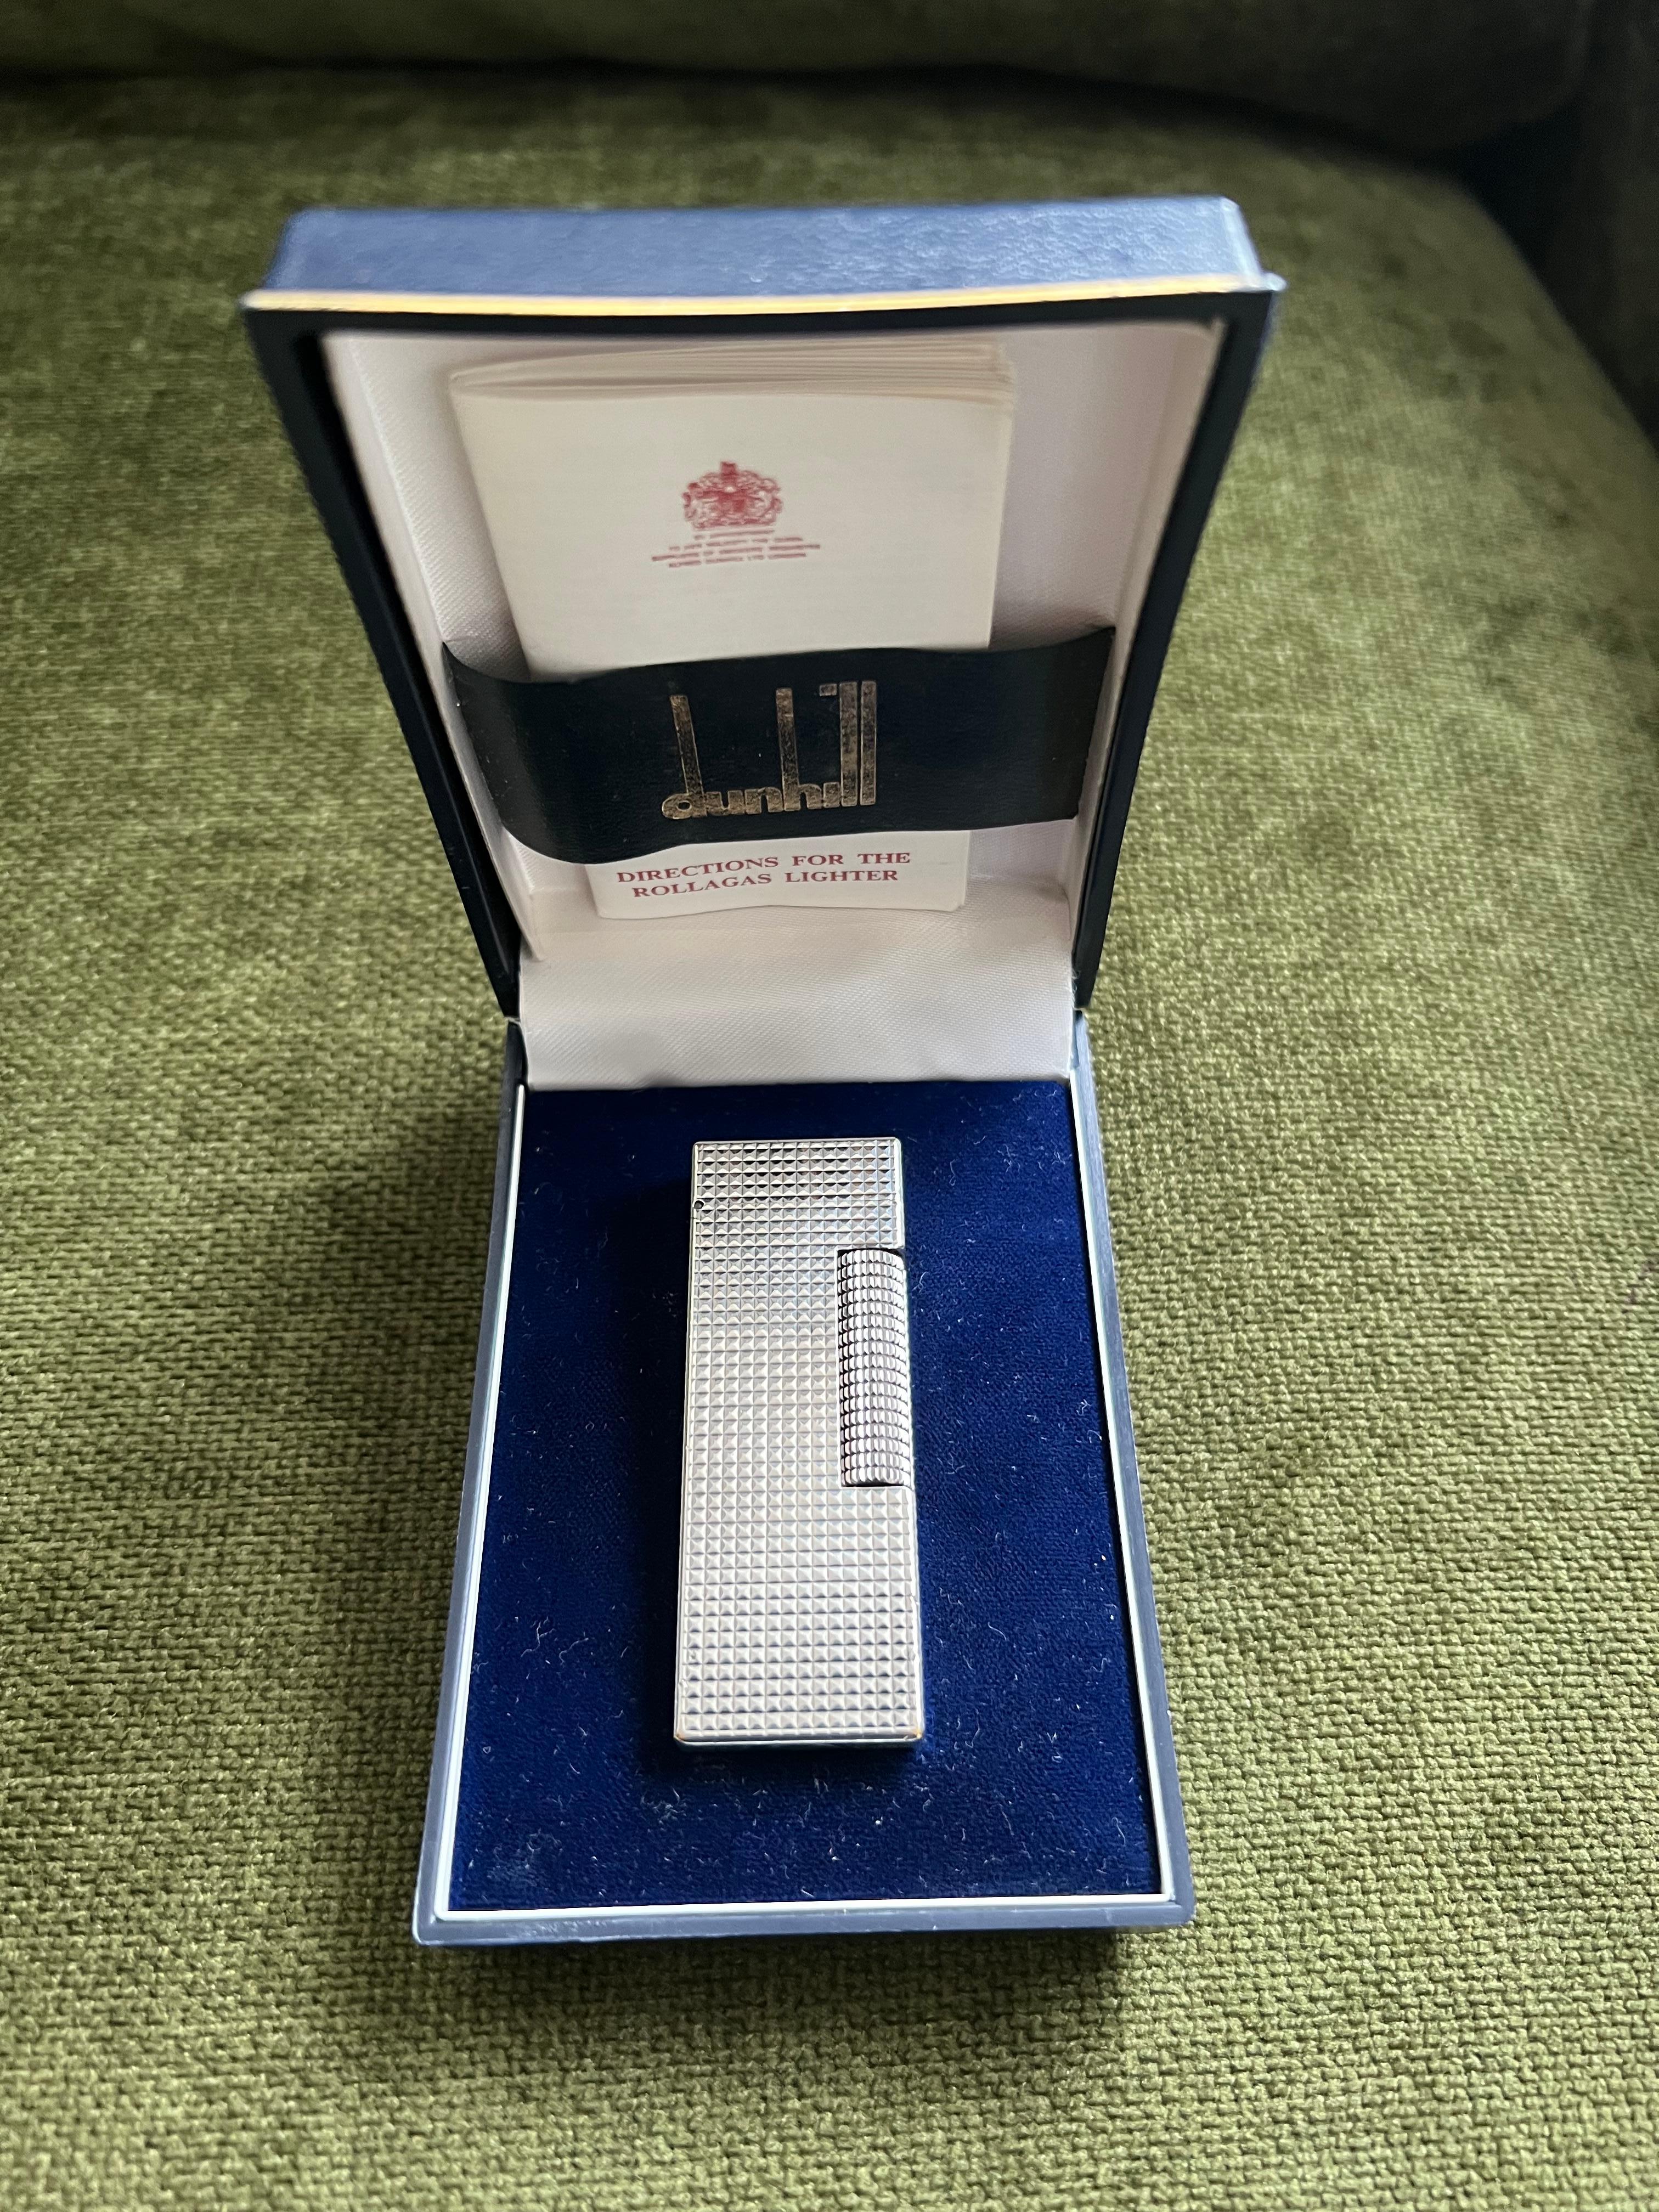 Rare Iconic Vintage and Elegant Dunhill silver Plated Swiss Made Lighter
In mint condition. 
Circa 1970
Works perfectly.
Iconic and beautifully engineered piece in rare condition.
 In original Blue box which is in mint condition.  Also includes